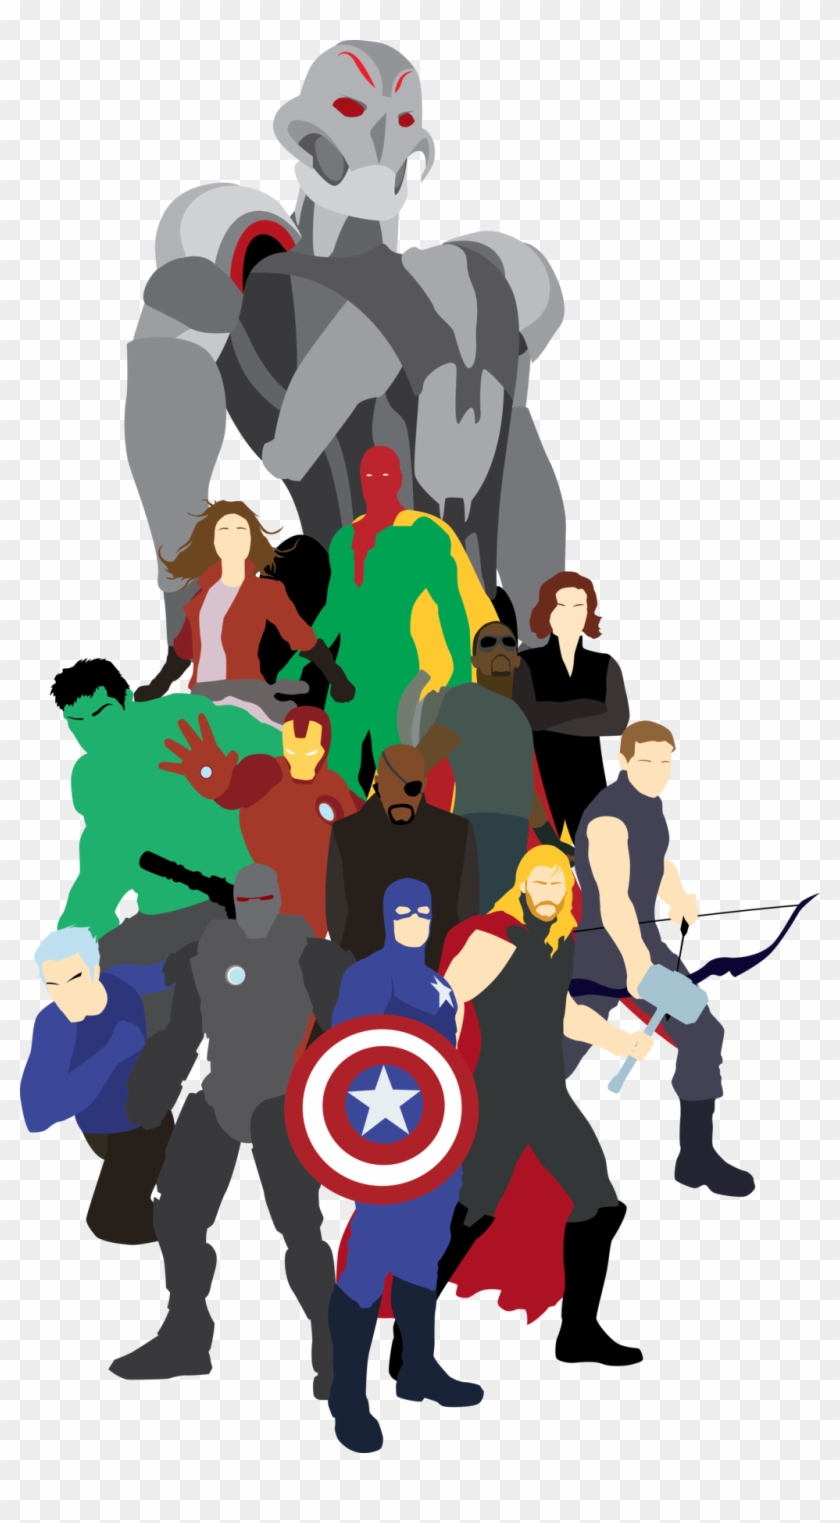 Avenger Age Of Ultron By Alexdti - Illustration #447084